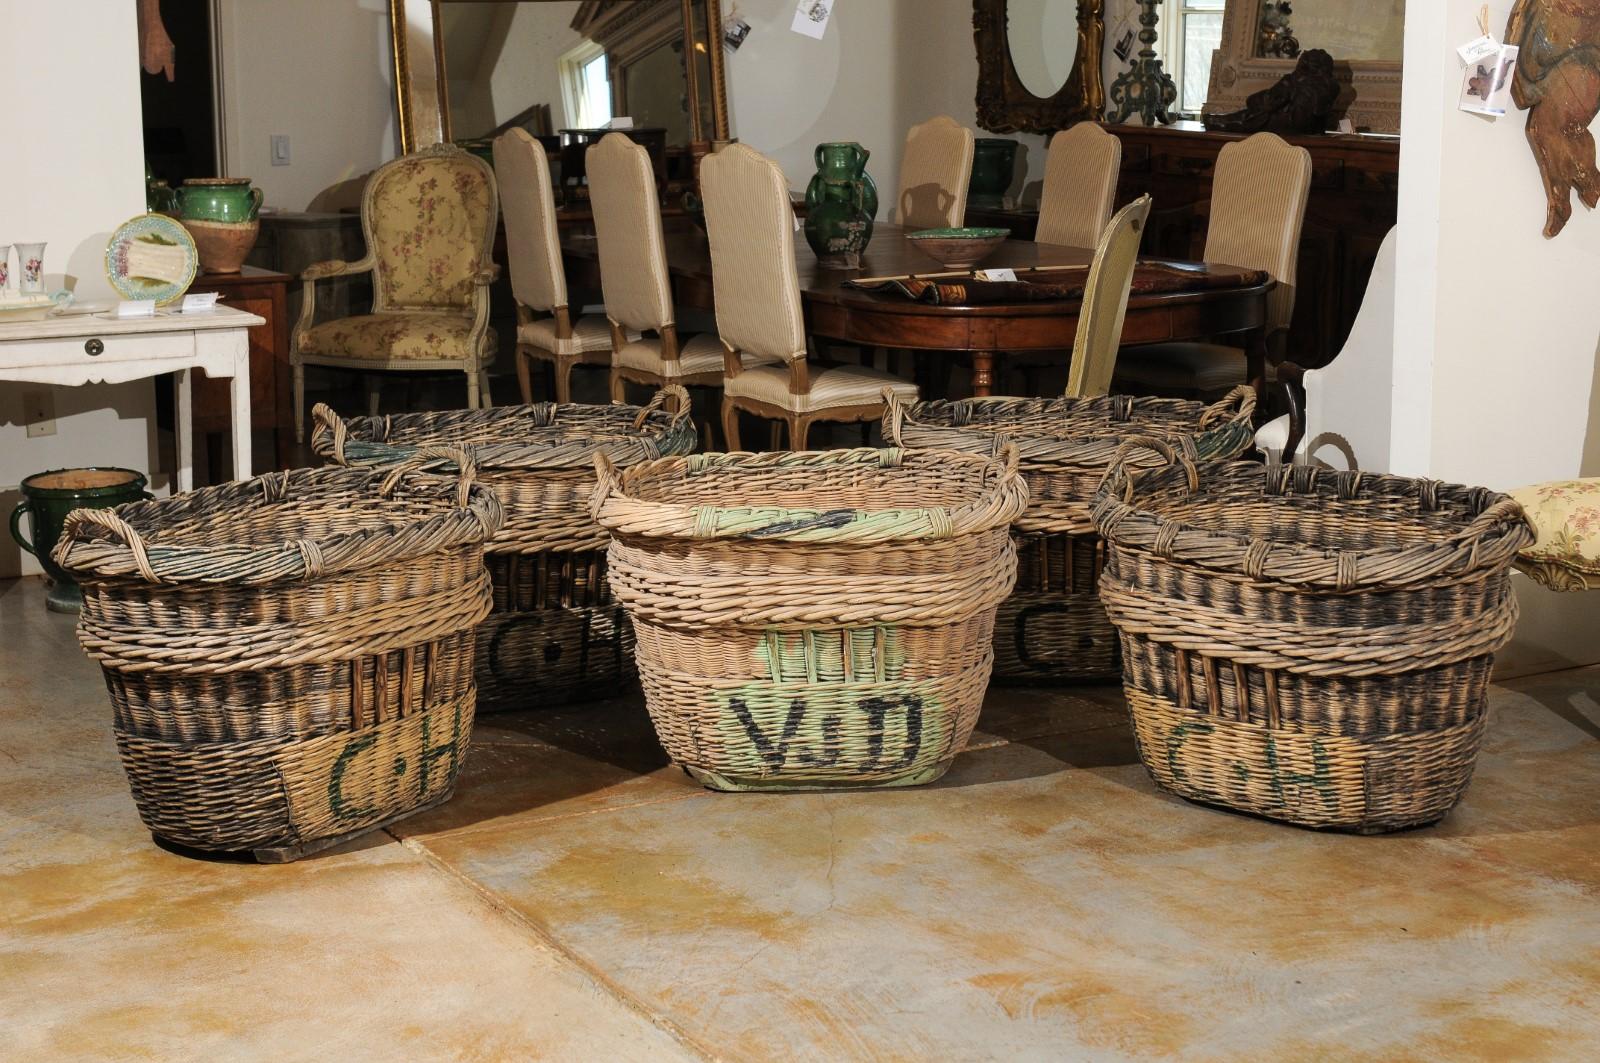 Only one left! Five large French wicker baskets from the early 20th century, priced and sold individually. Born in France in the early years of the 20th century, each of these large rustic wicker baskets features an oval shape, topped with a twisted